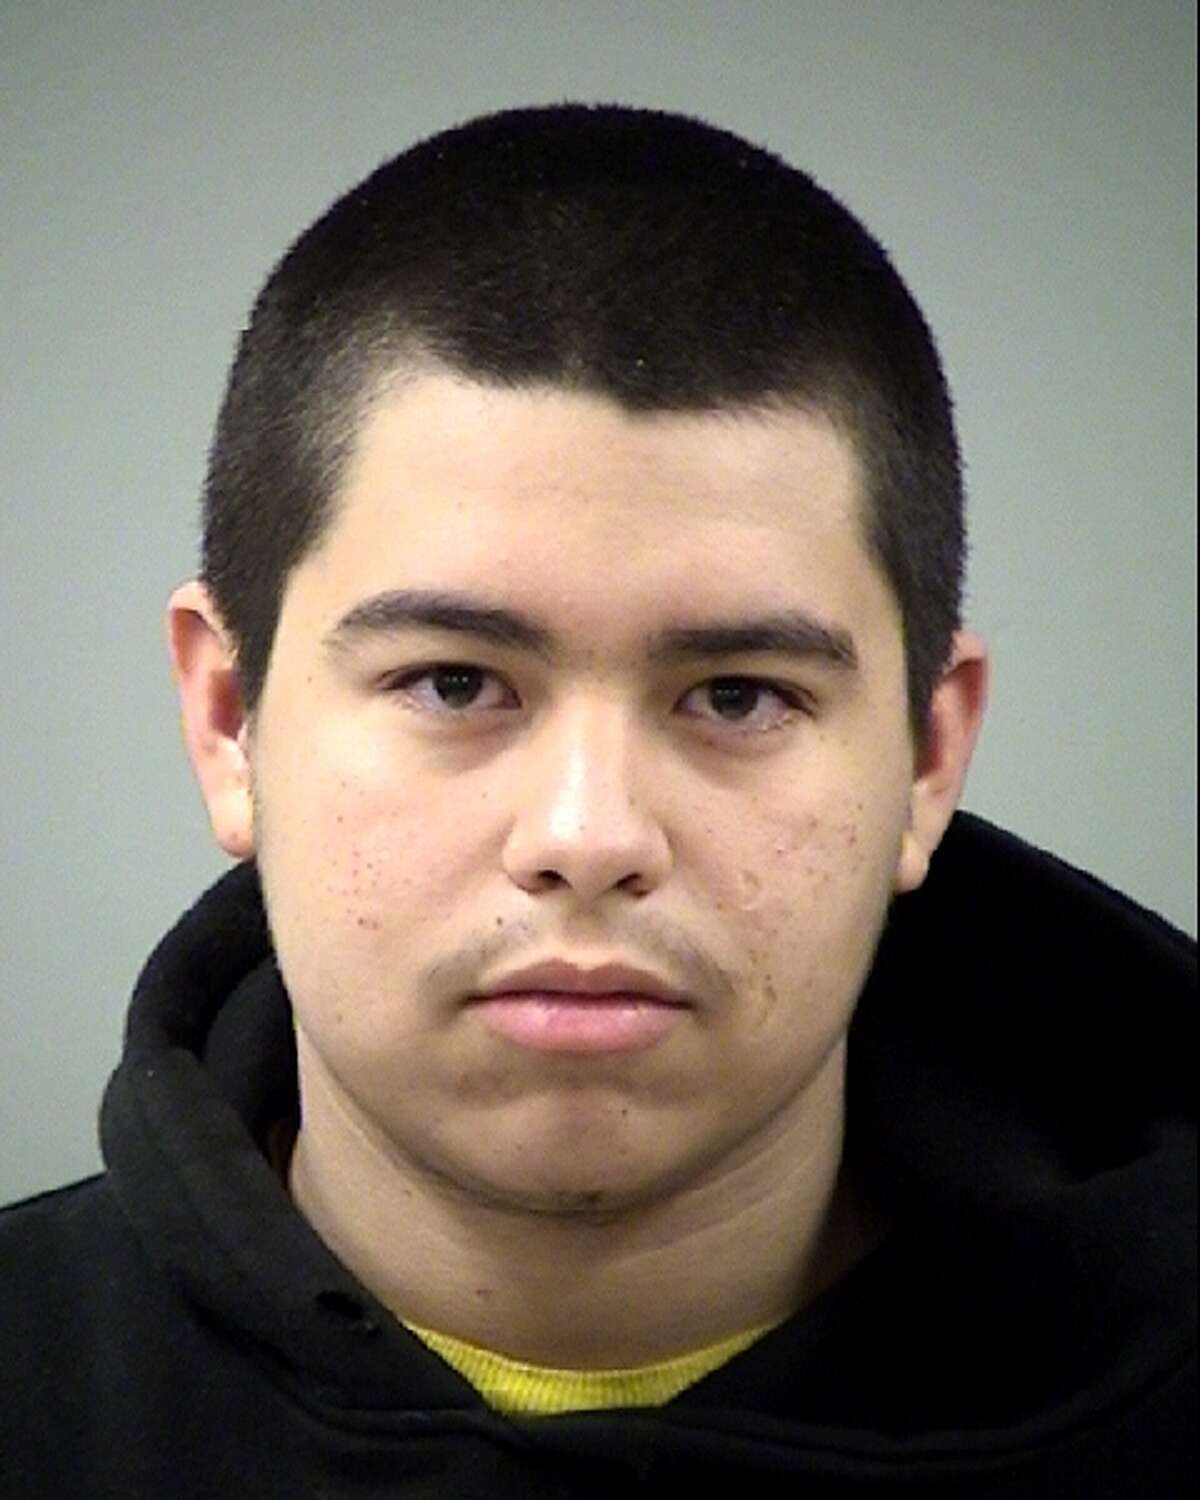 Xxx Full Hd16 Yers - 17-year-old faces child porn charges after recording classmates in San  Antonio school bathroom